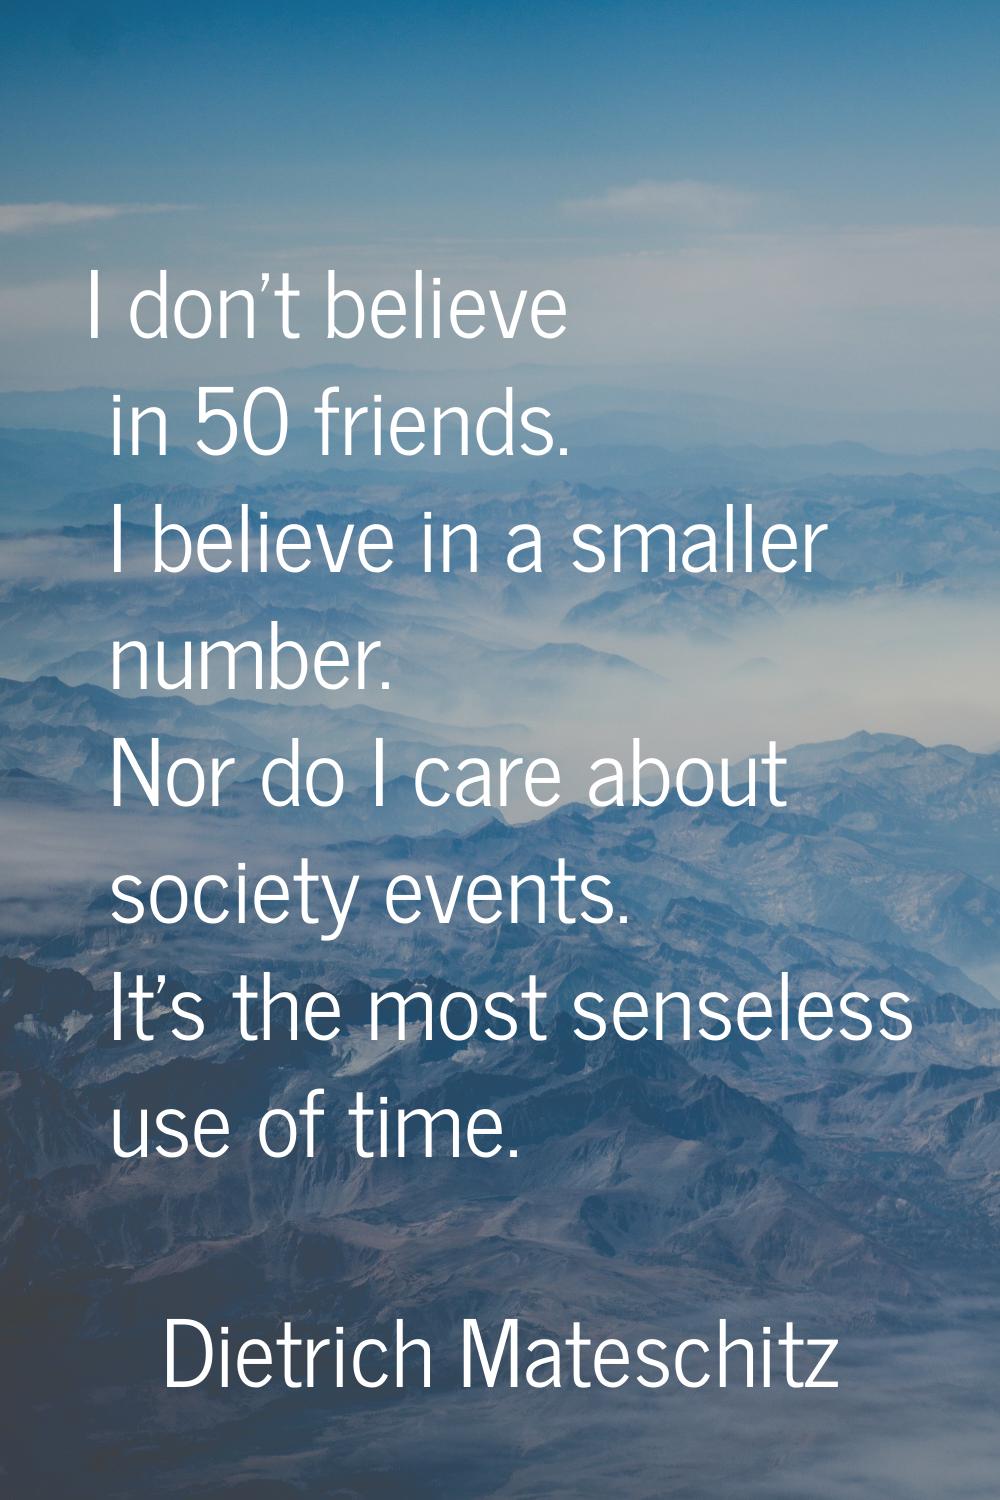 I don't believe in 50 friends. I believe in a smaller number. Nor do I care about society events. I